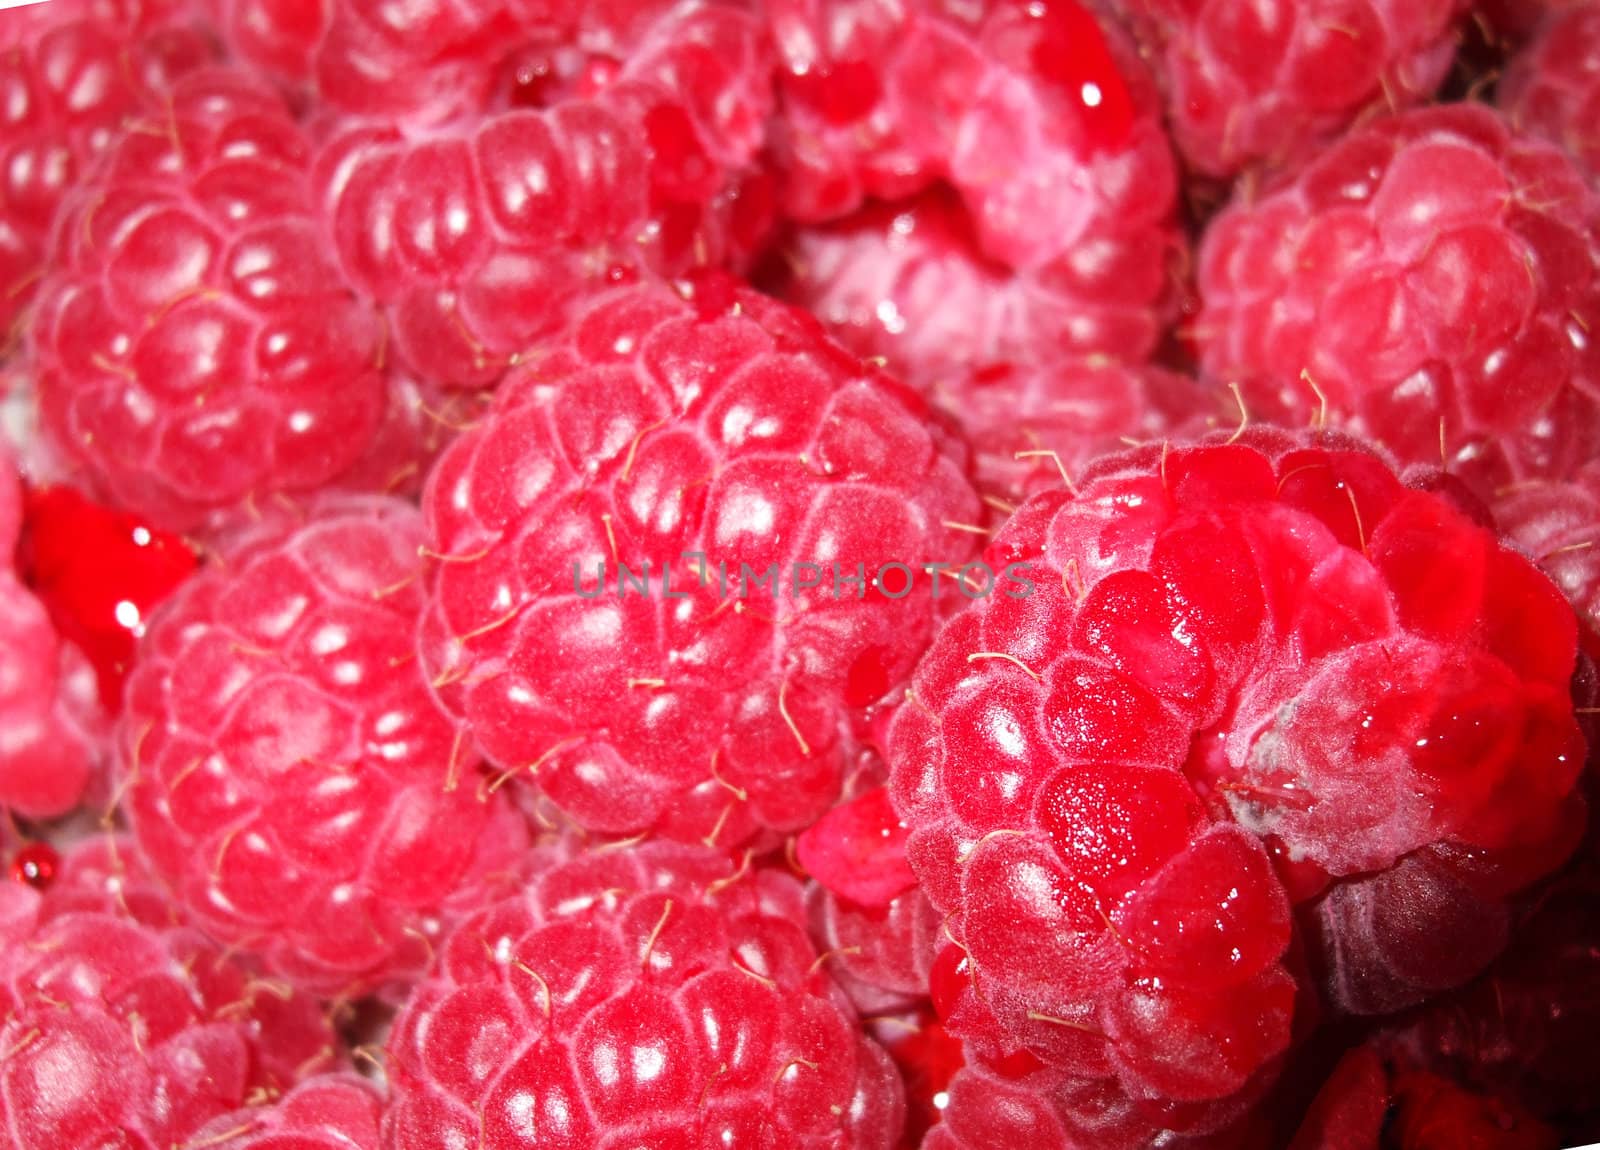 A close-up of a punnet of juicy pink raspberries